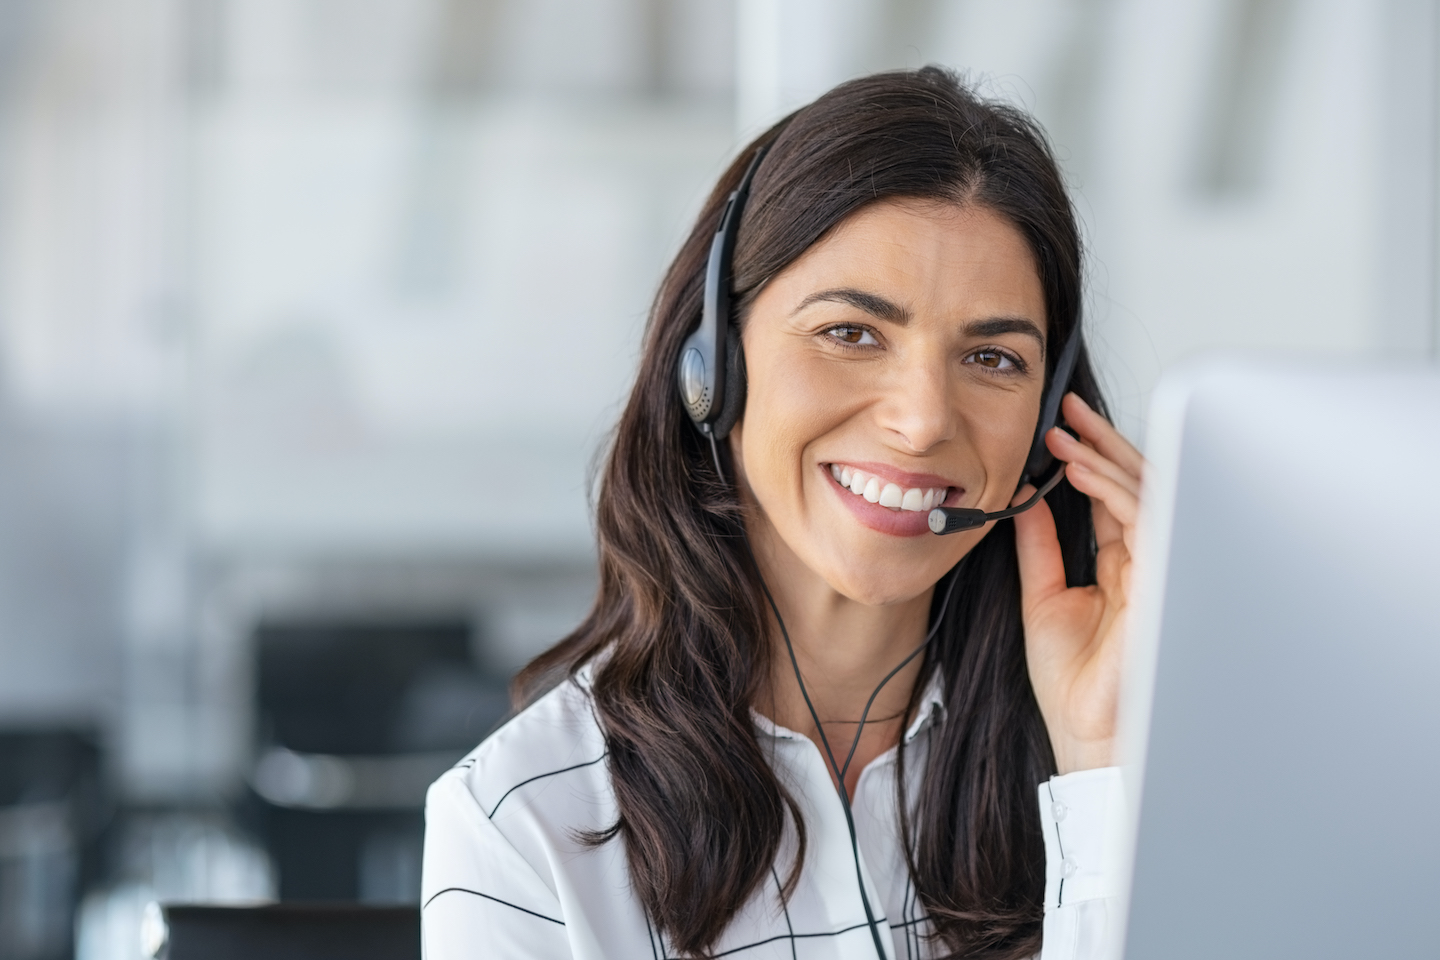 4 Things Lawyers Should Look For When Choosing a Phone Answering Service